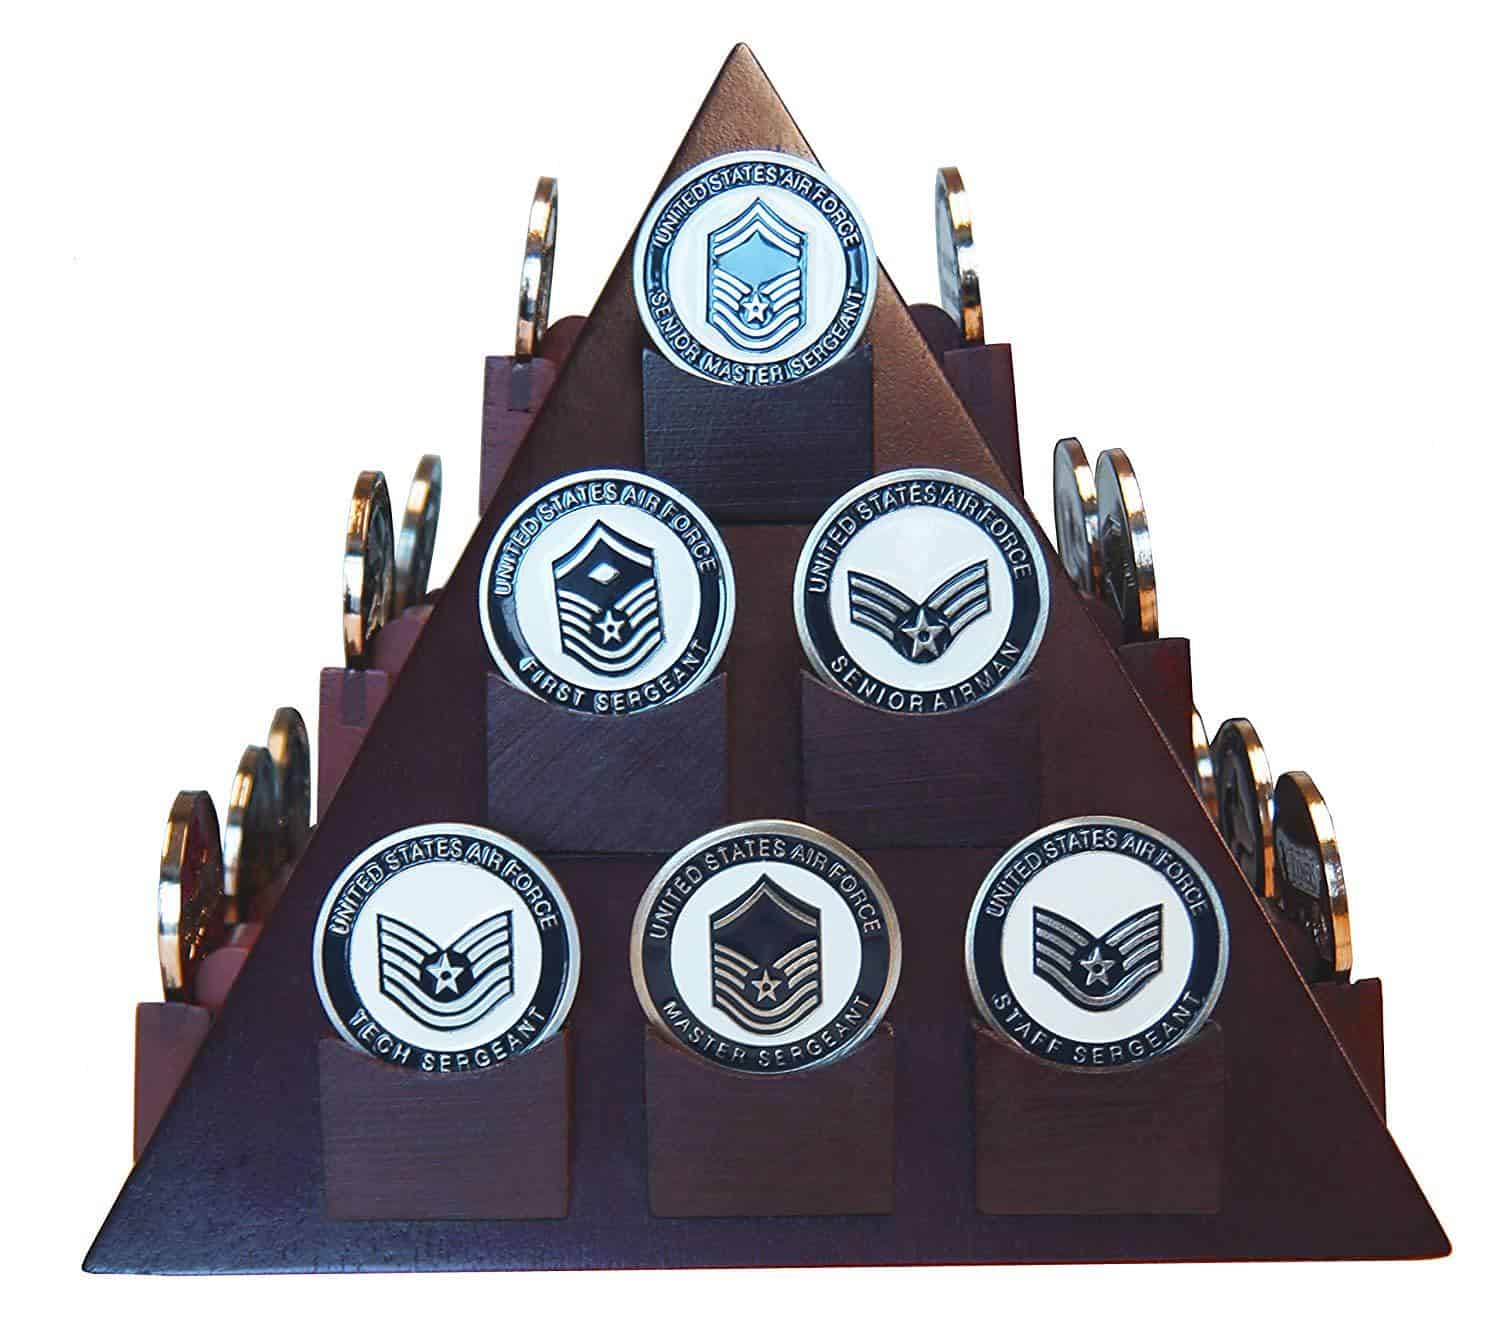 Pyramid Shaped Military Challenge Coin & Poker/Casino Chip Display Solid Wood - Cherry Finish 